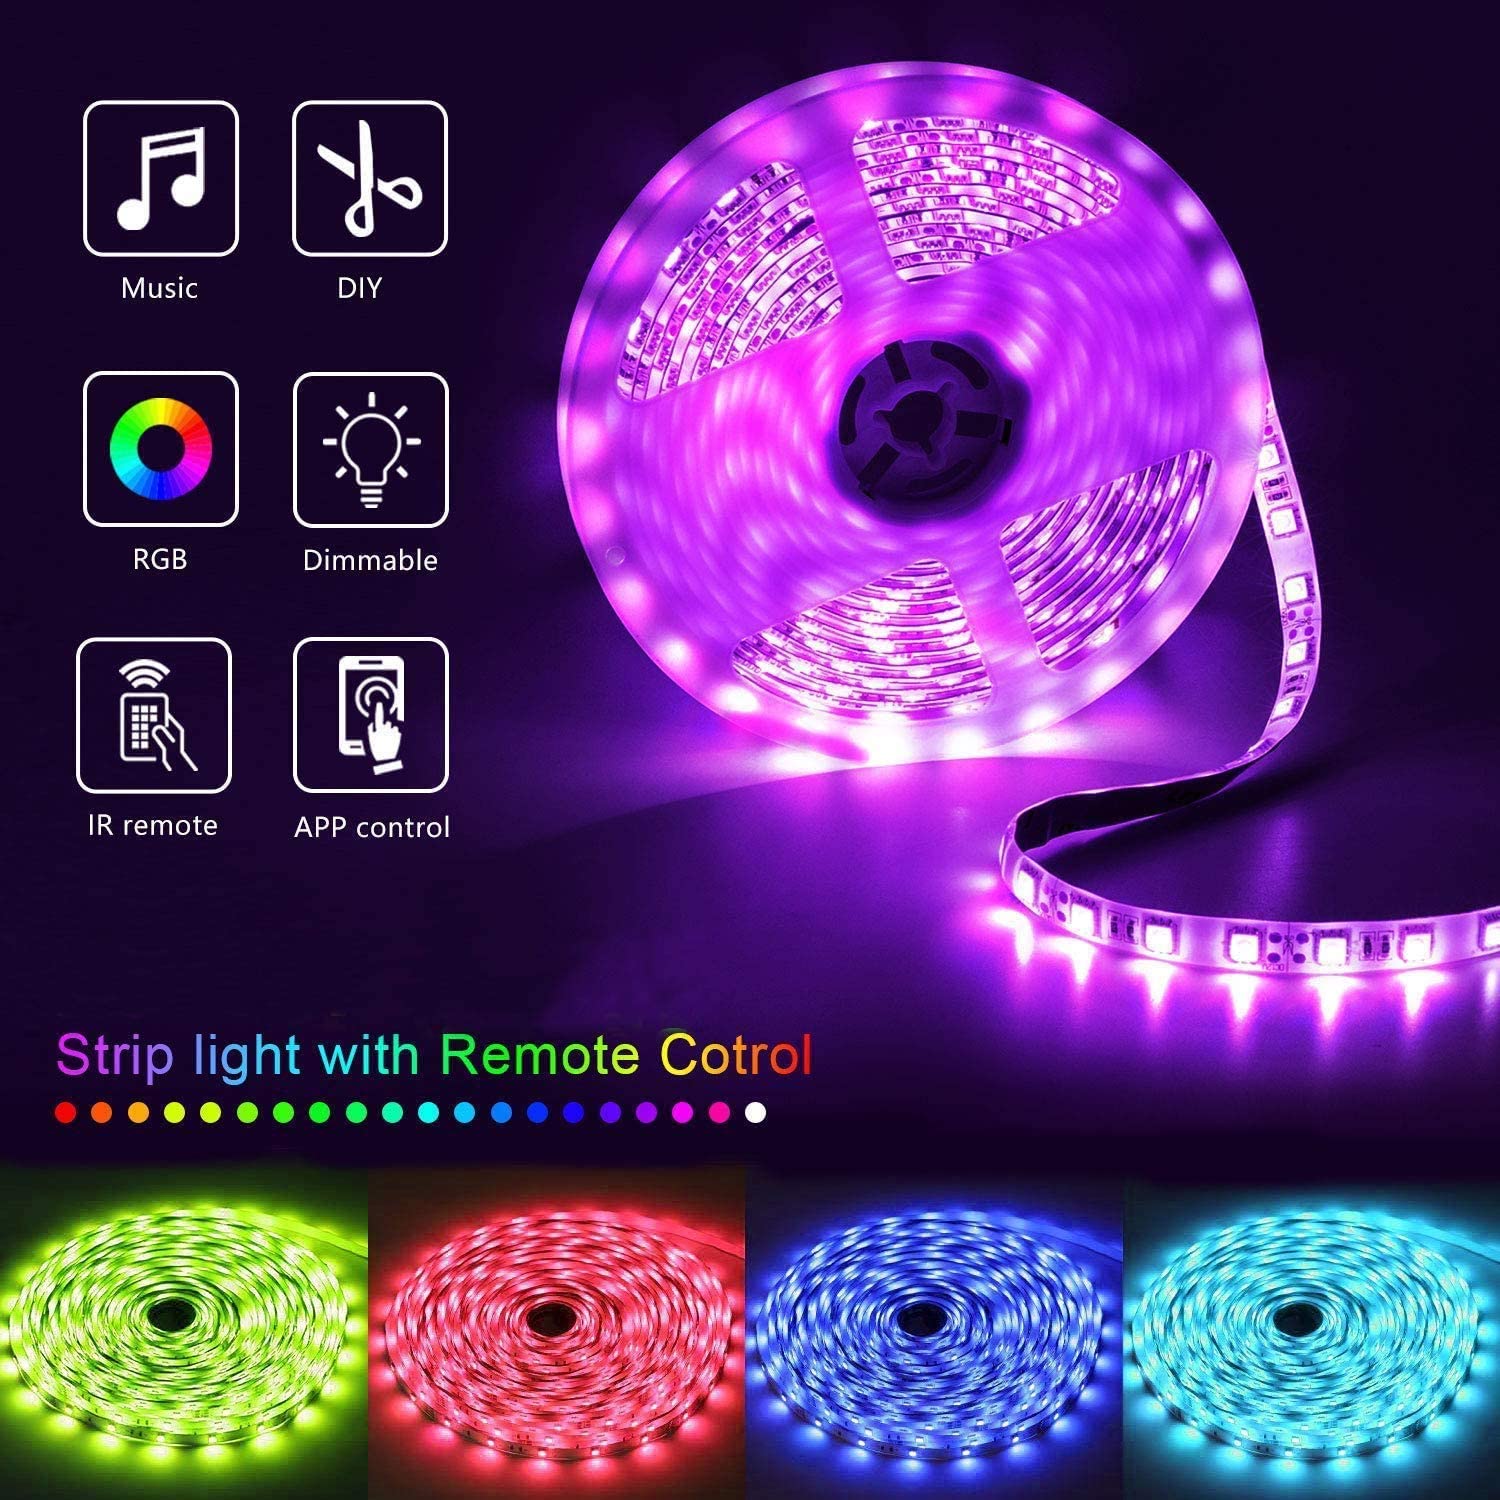 50% OFF Today-LED Strip Lights, WiFi LED Tape Lights Works with Alexa